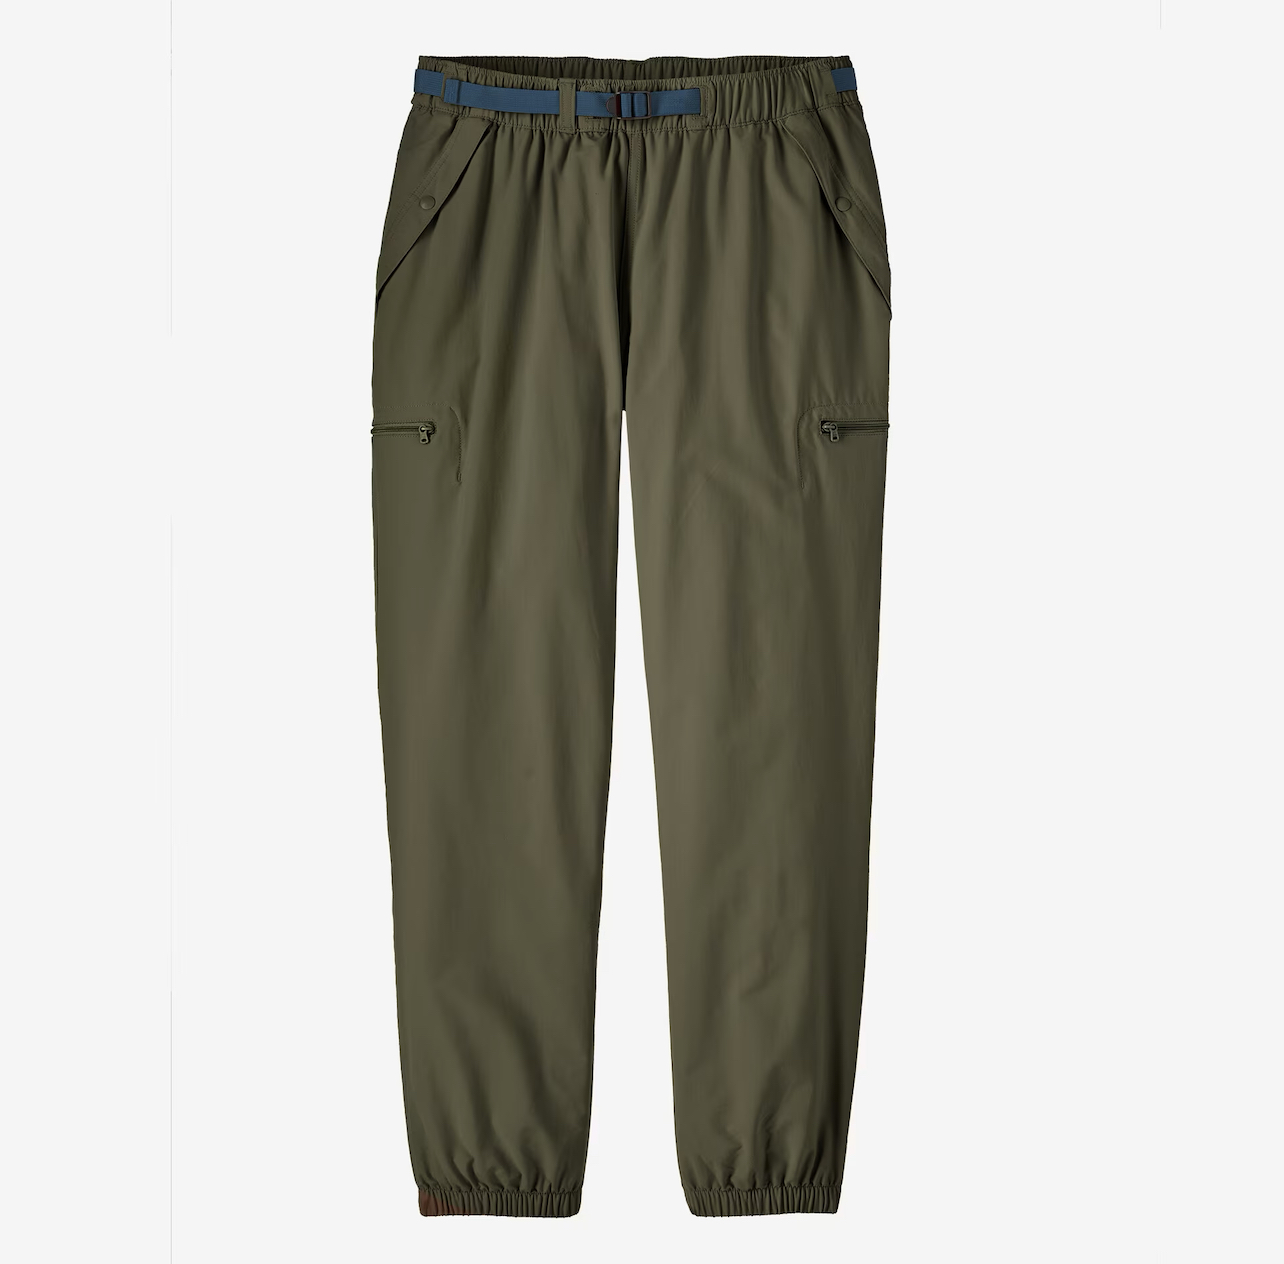 Patagonia M's Outdoor Everyday Pants - Basin Green - Large